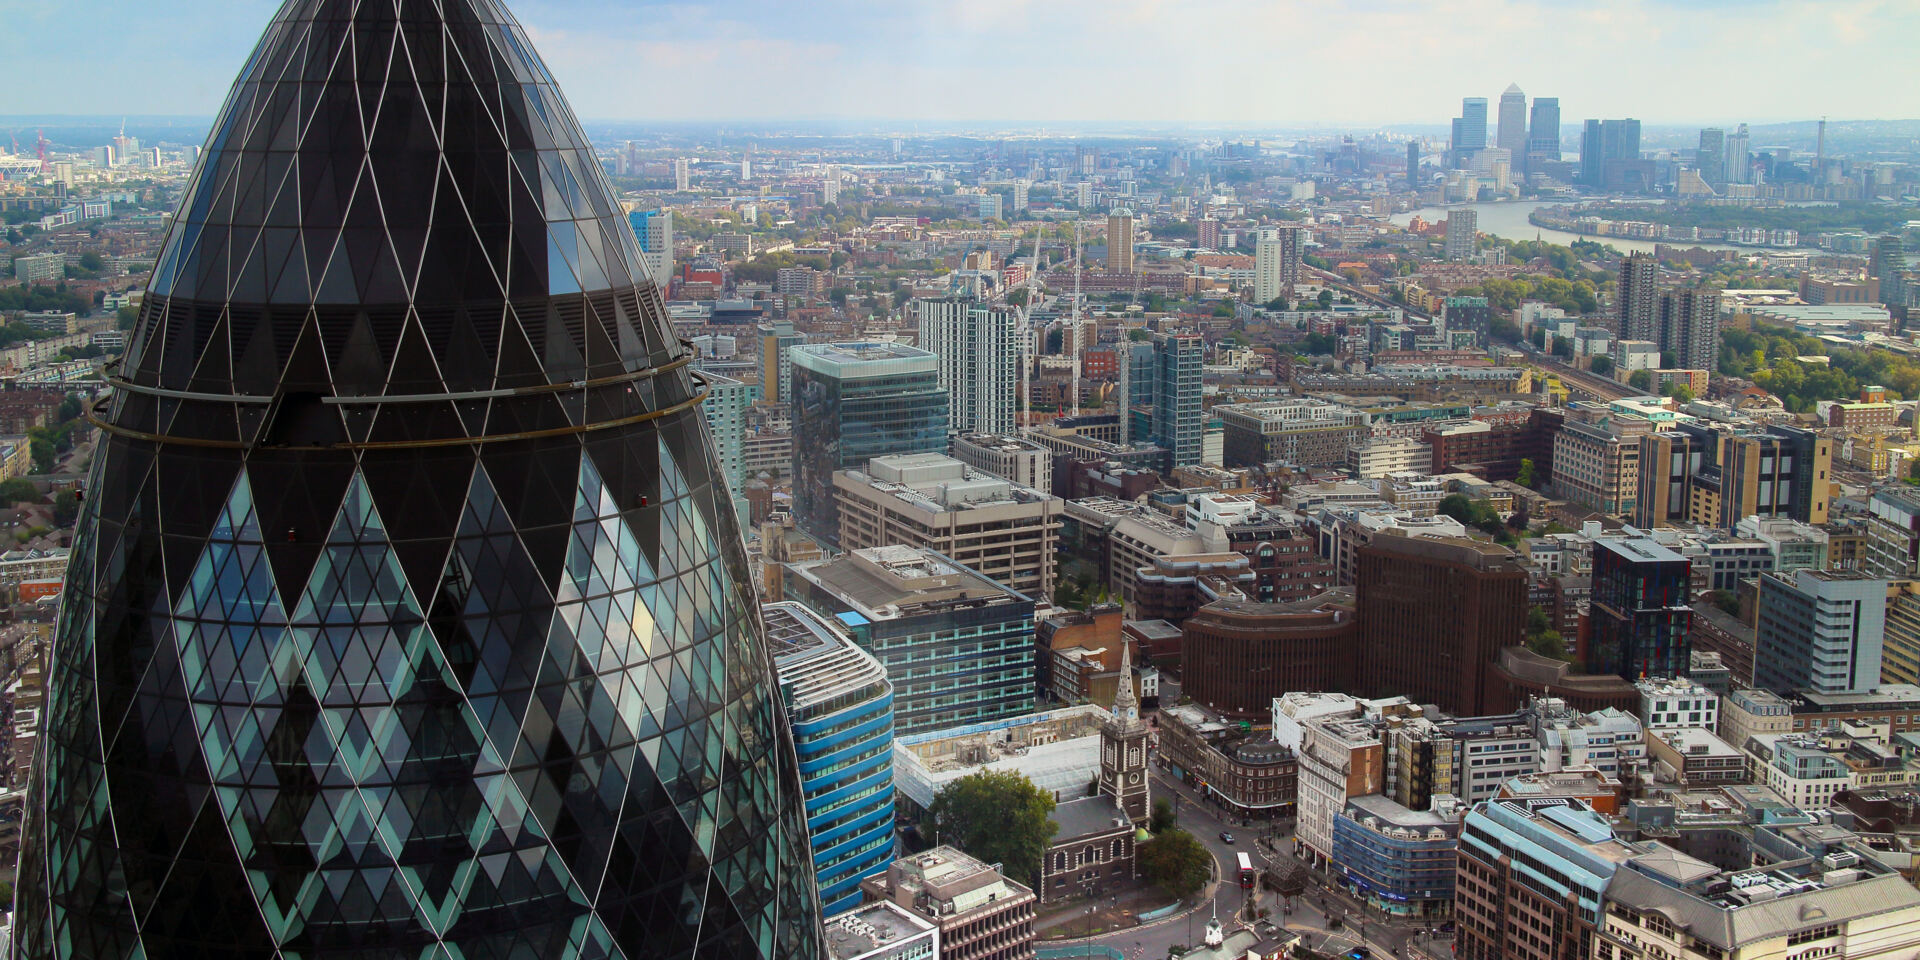 London panoramic view over Gherkin, Canary Wharf and the Thames river, taken on a cloudy, summer day